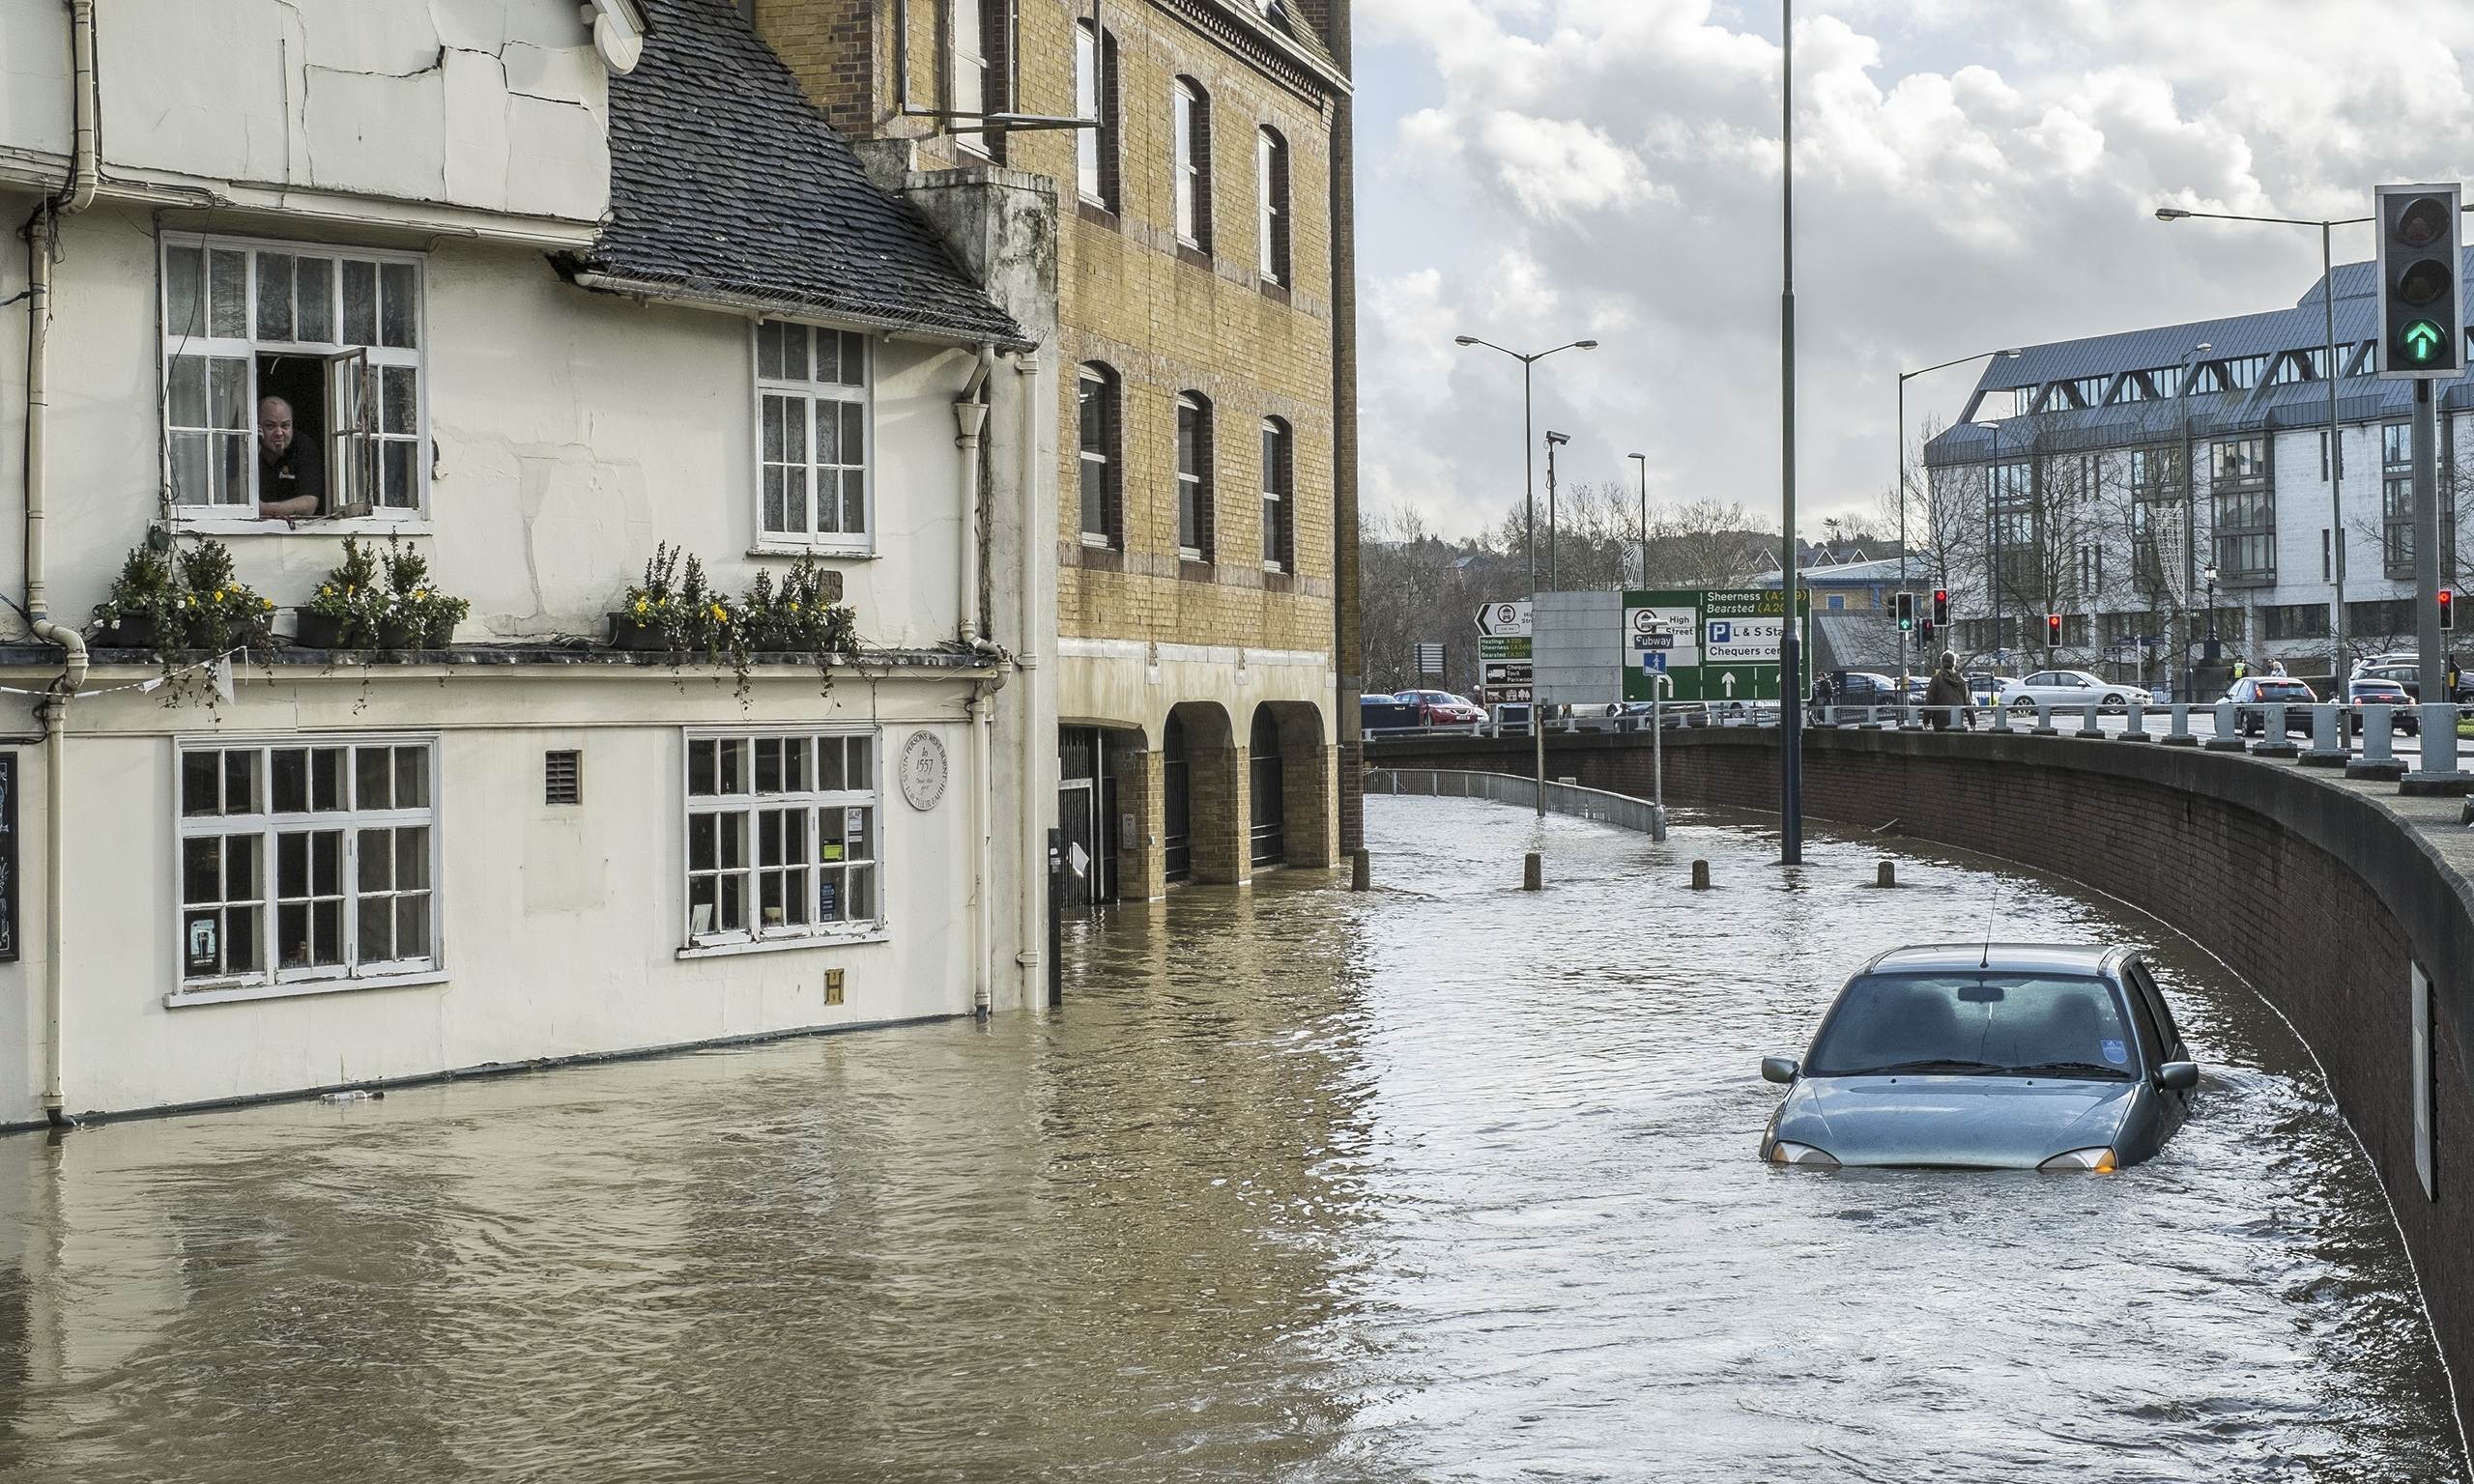 Uk Braced For More Storms And Floods Uk News The Guardian 